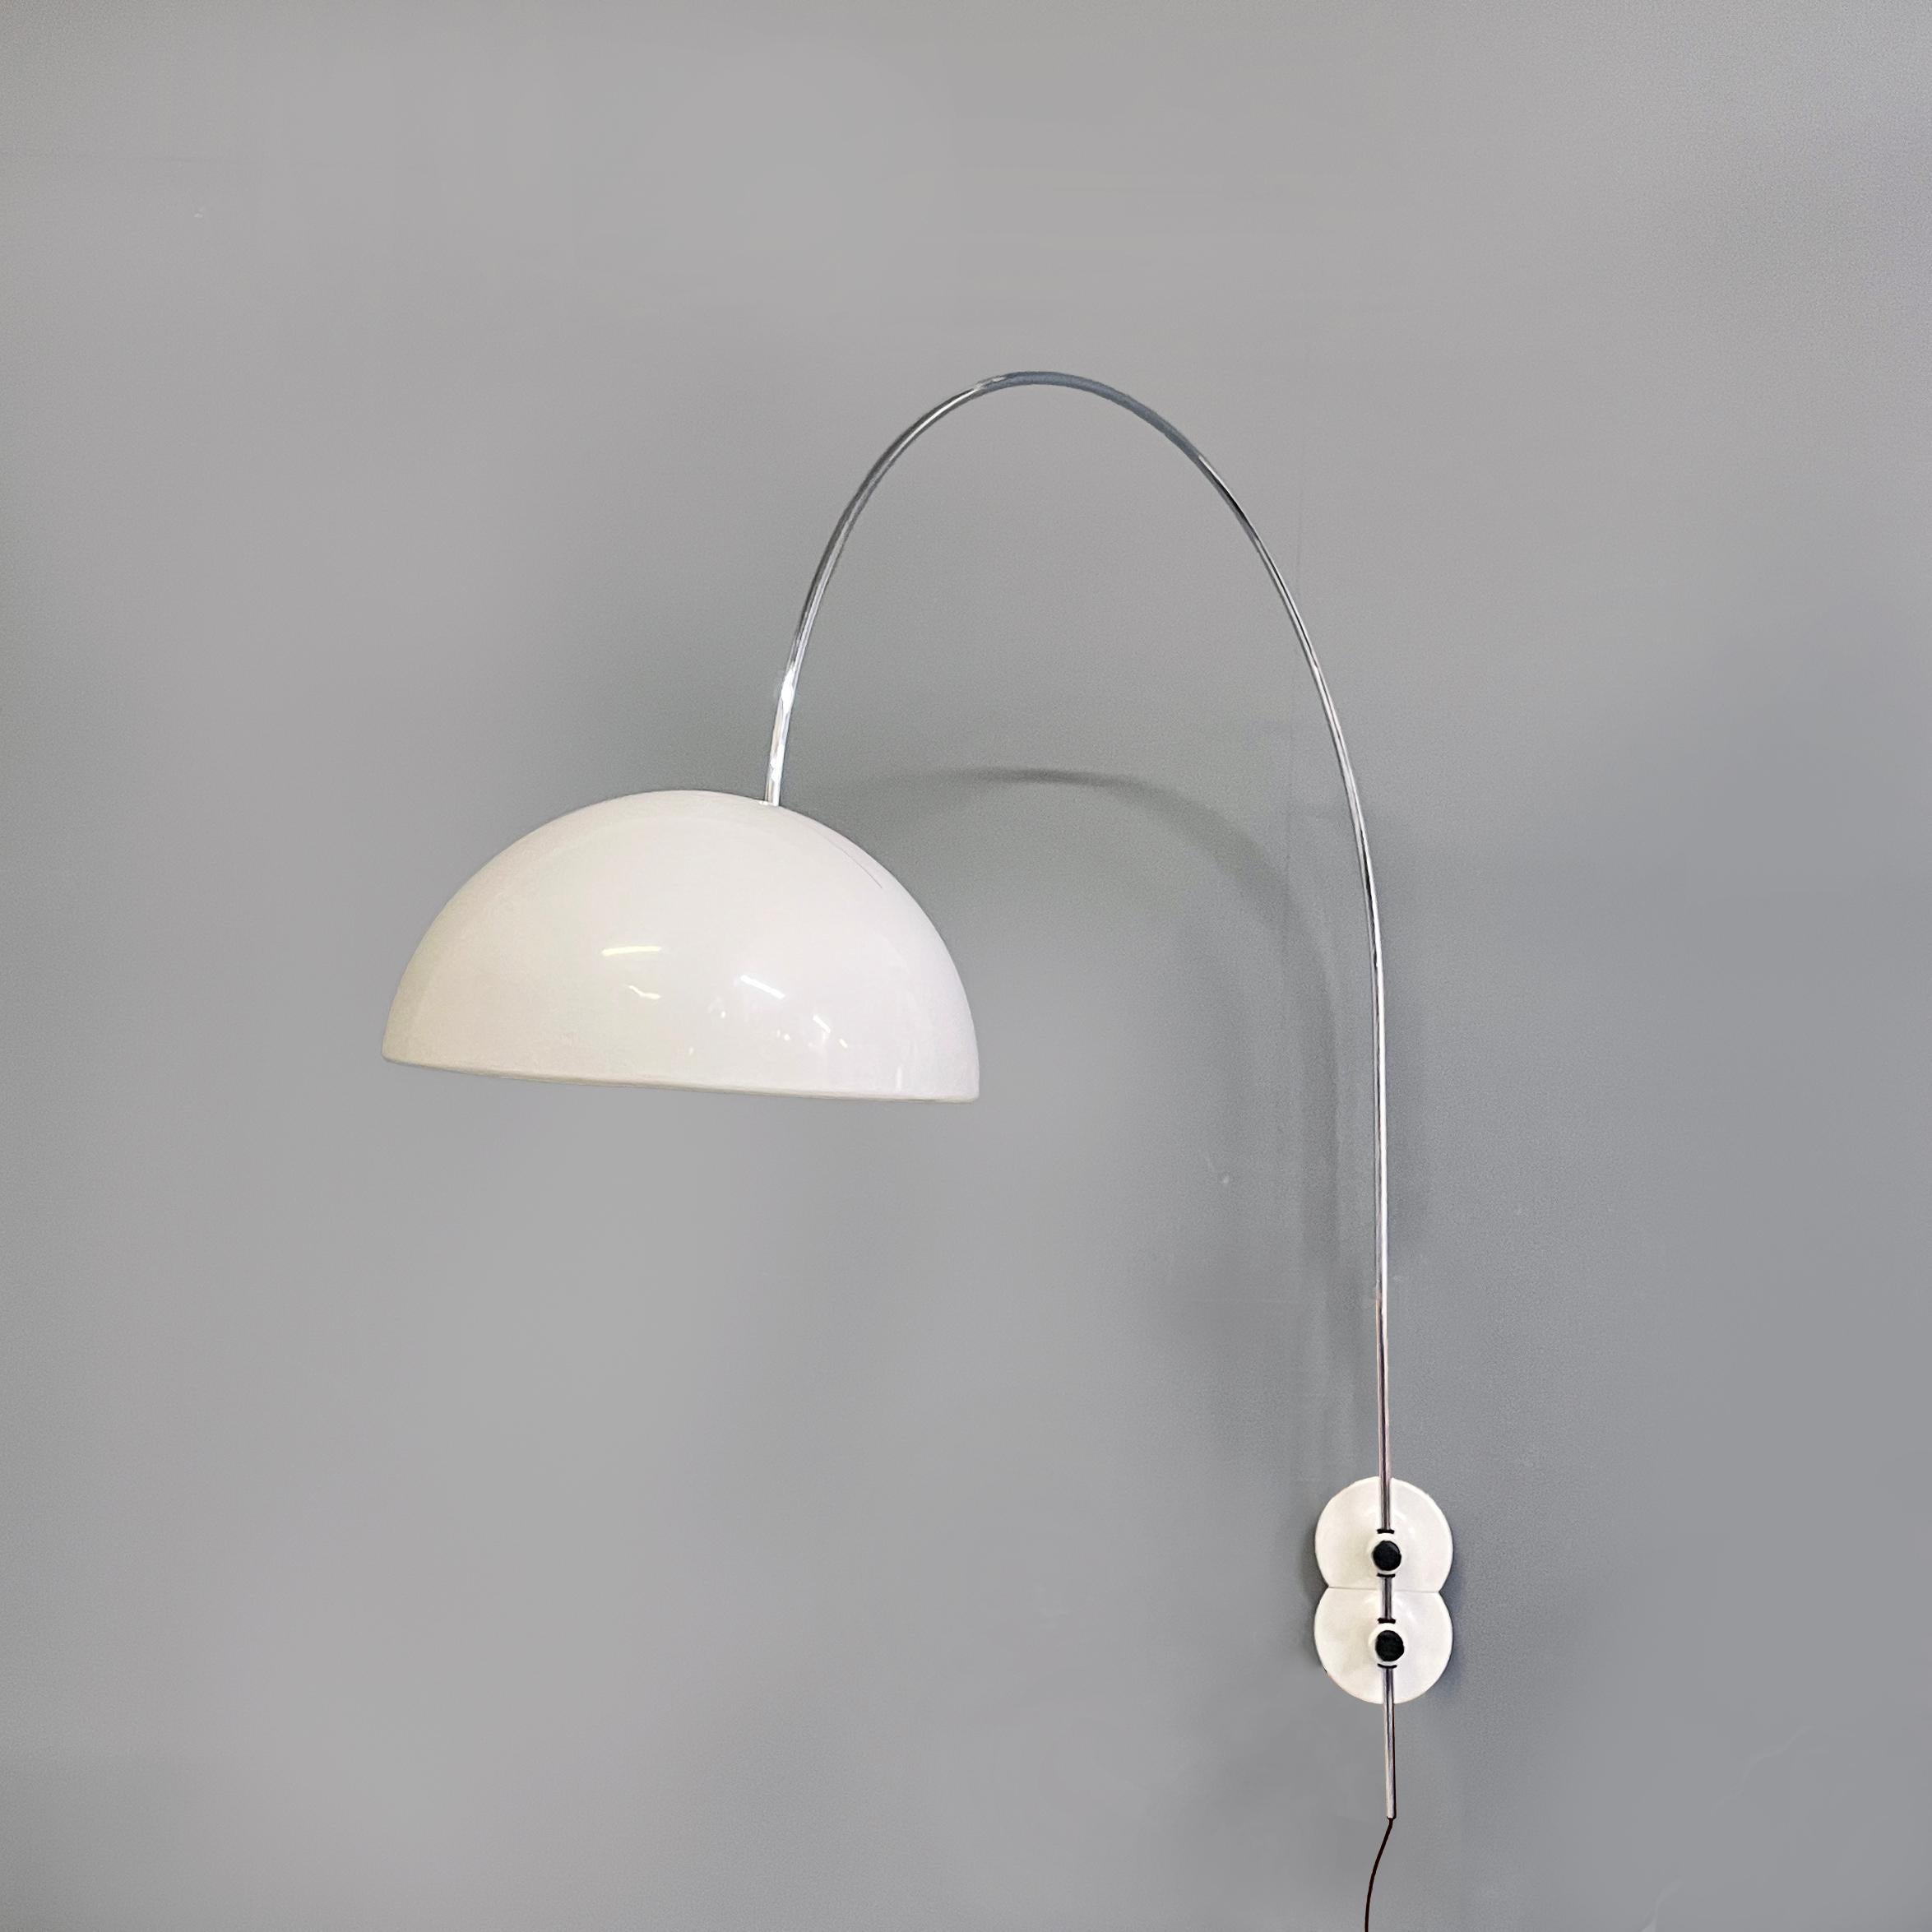 Italian modern Adjustable wall lamp Coupé 1159 by Joe Colombo for O-Luce, 1970s
Wall lamp mod. Coupé 1159 with adjustable dome lampshade in white lacquered metal. Inside the lampshade there is the switch. The arched adjustable structure is made of